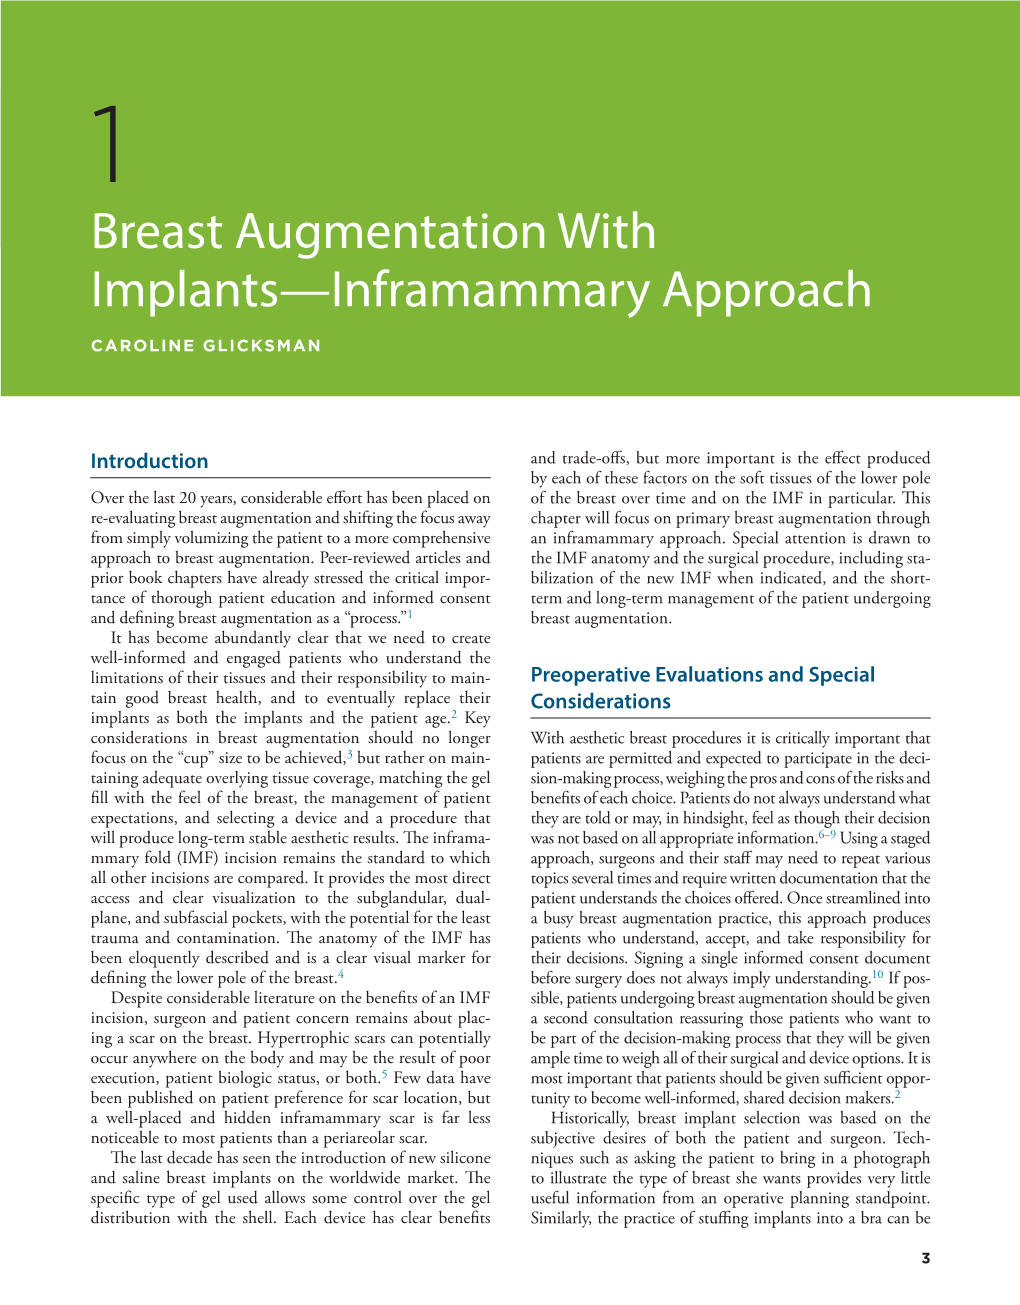 1 Breast Augmentation with Implants—Inframammary Approach